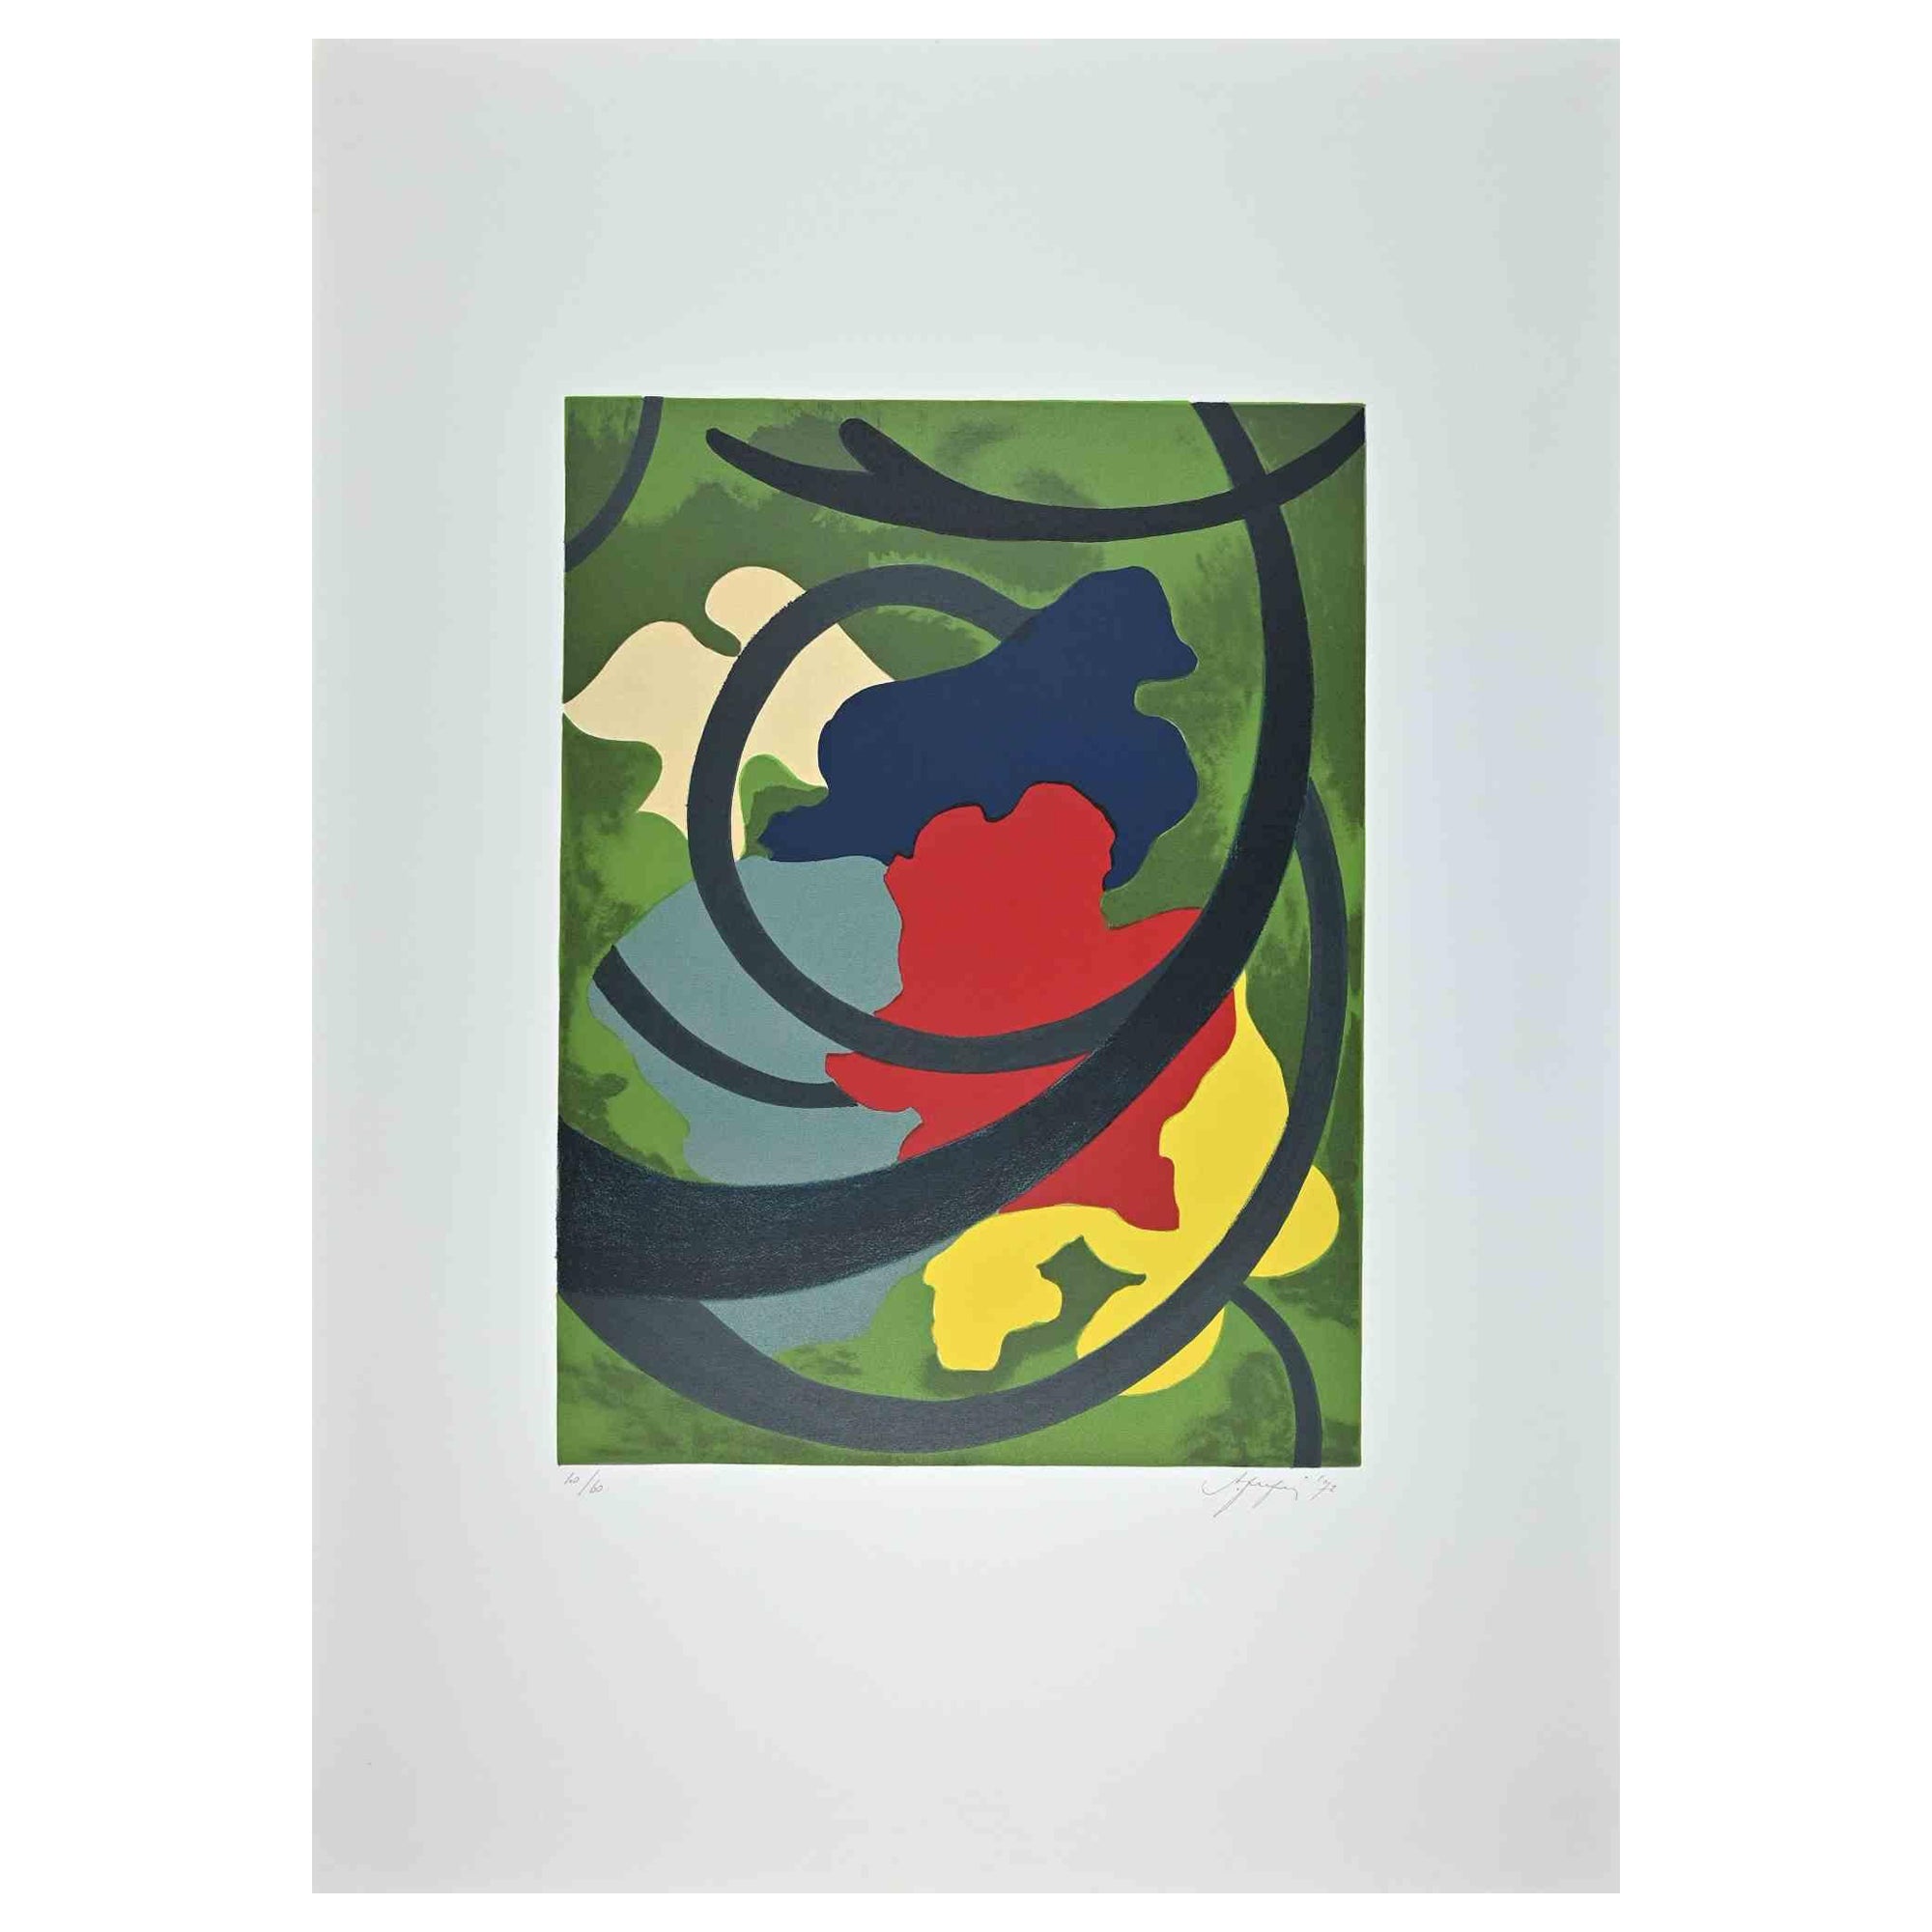 Abstract Composition - Original Screen Print by A. Fanfani - 1972